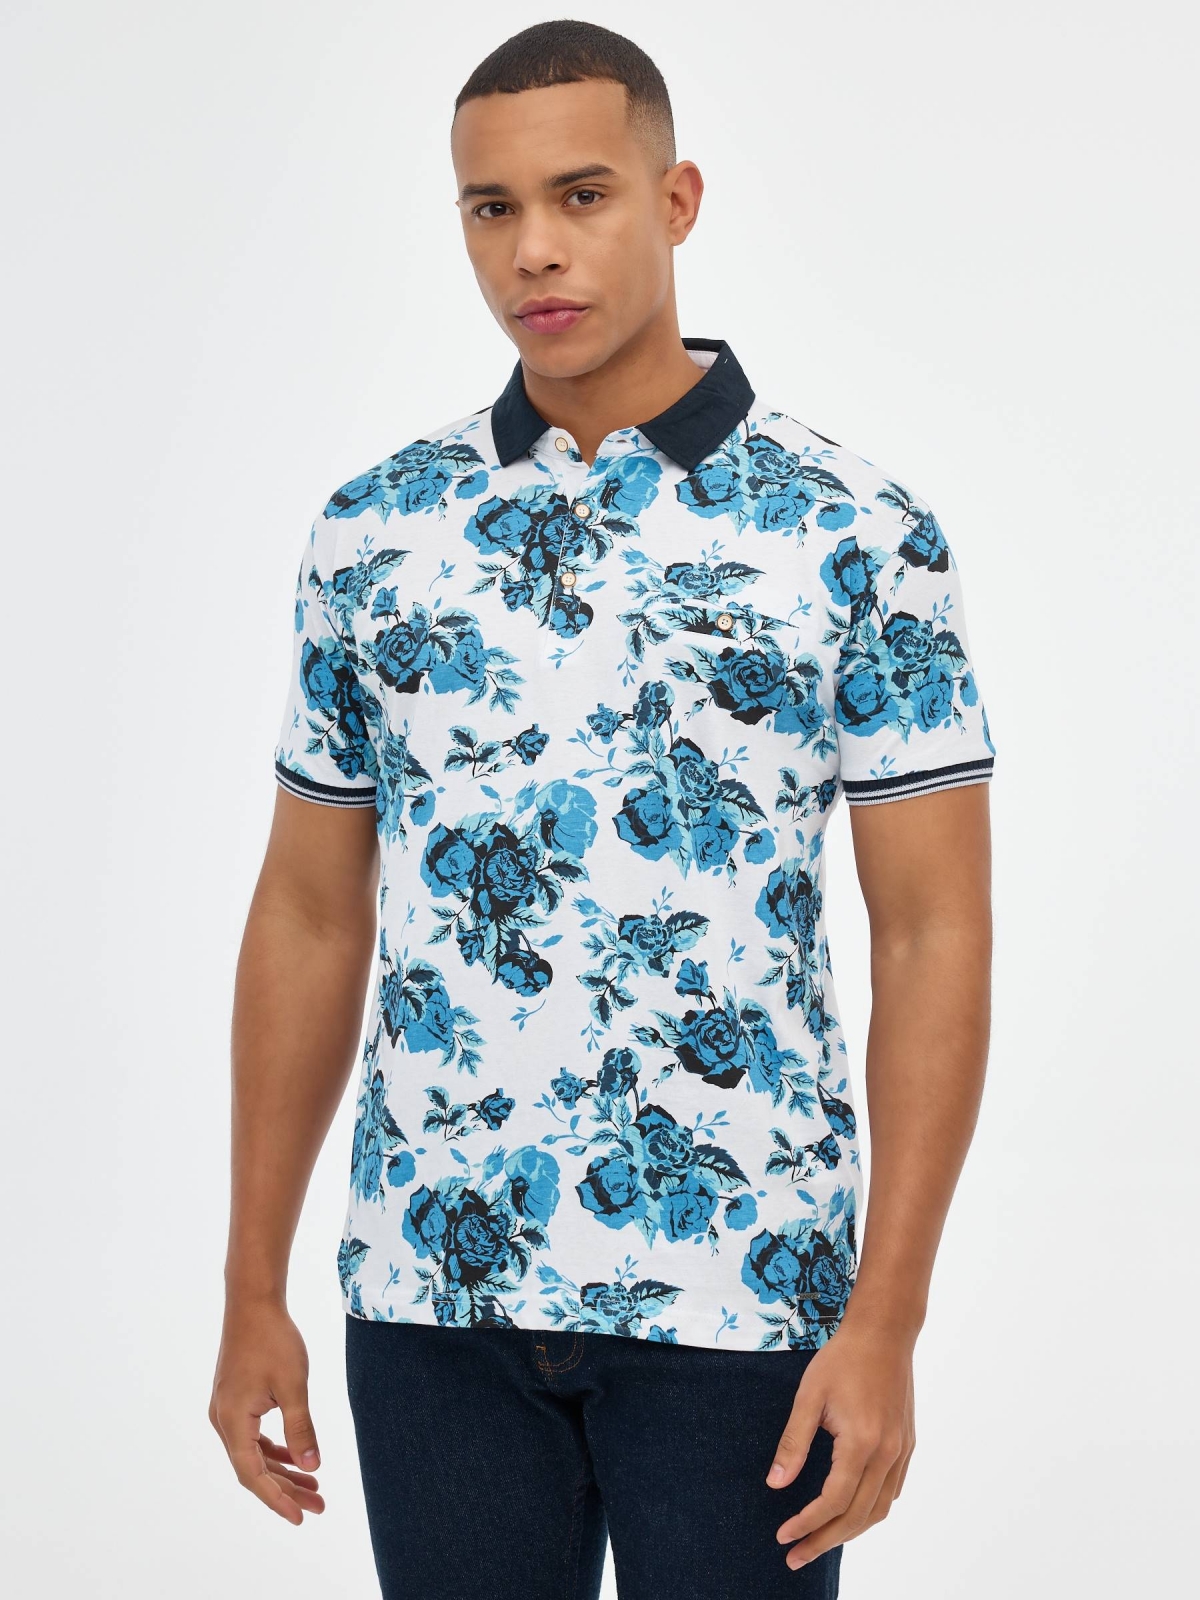 Blue rose print polo shirt white middle front view